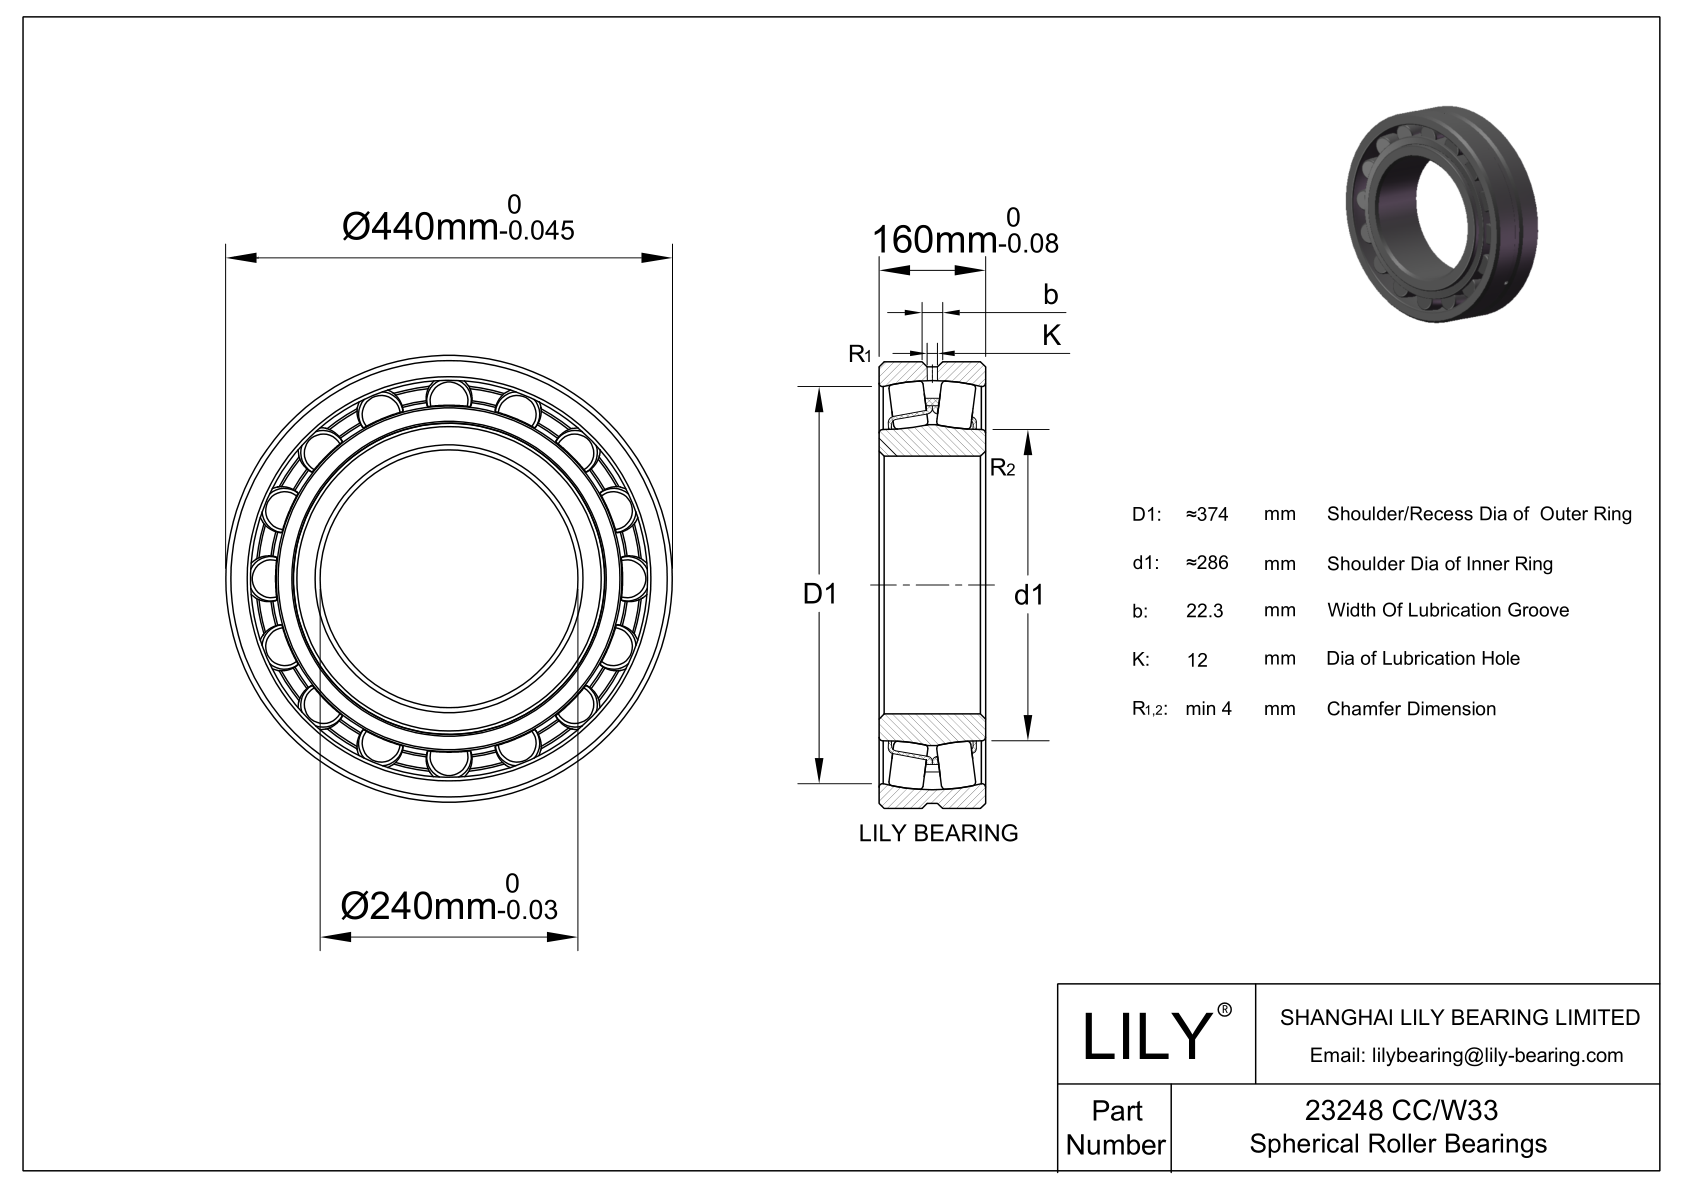 23248 CC/W33 Double Row Spherical Roller Bearing cad drawing